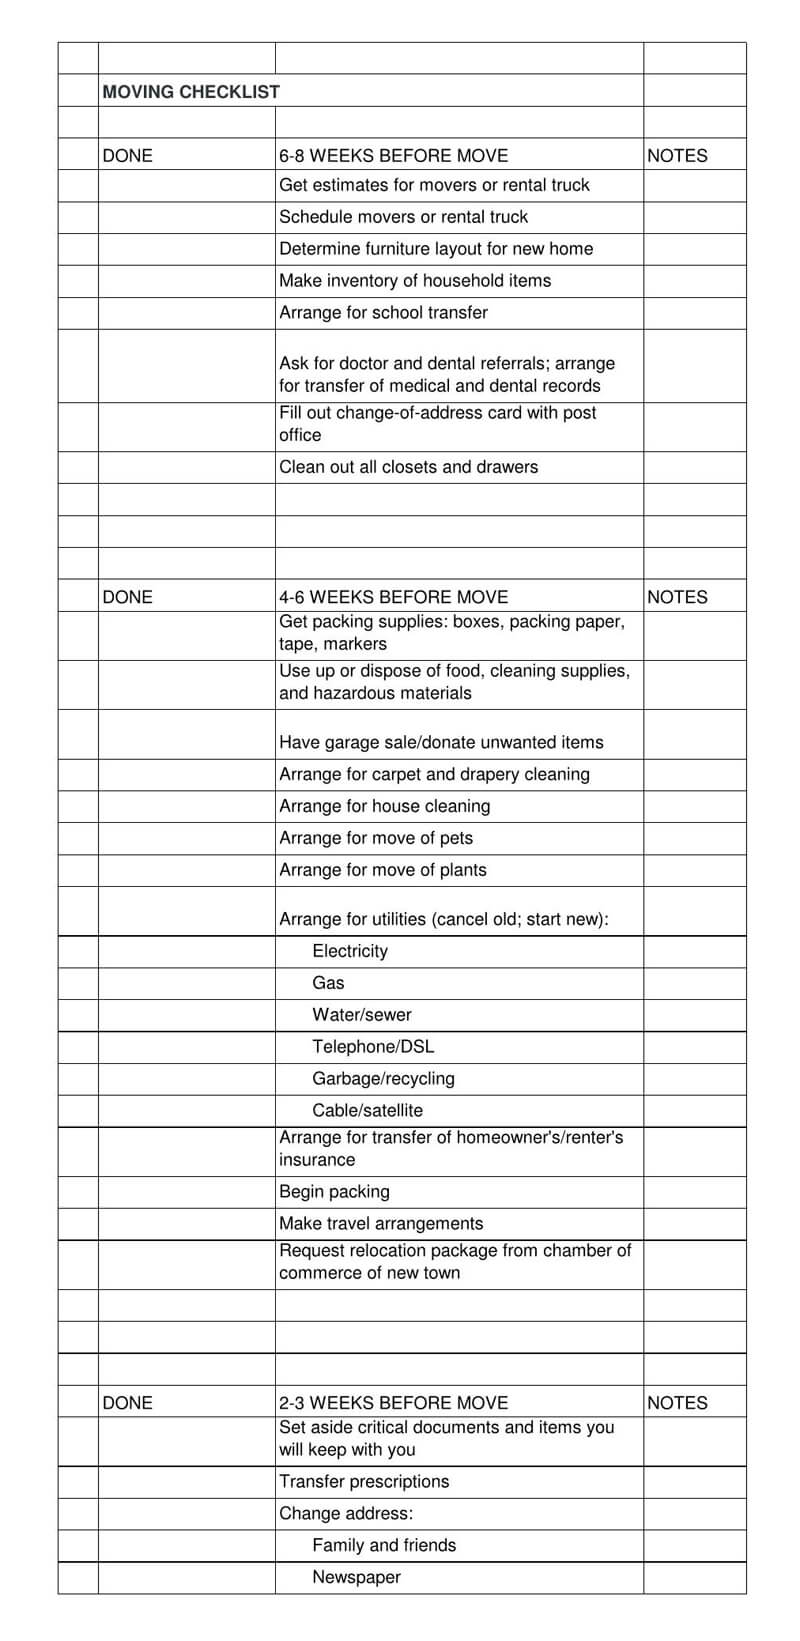 The Sample Moving Checklist